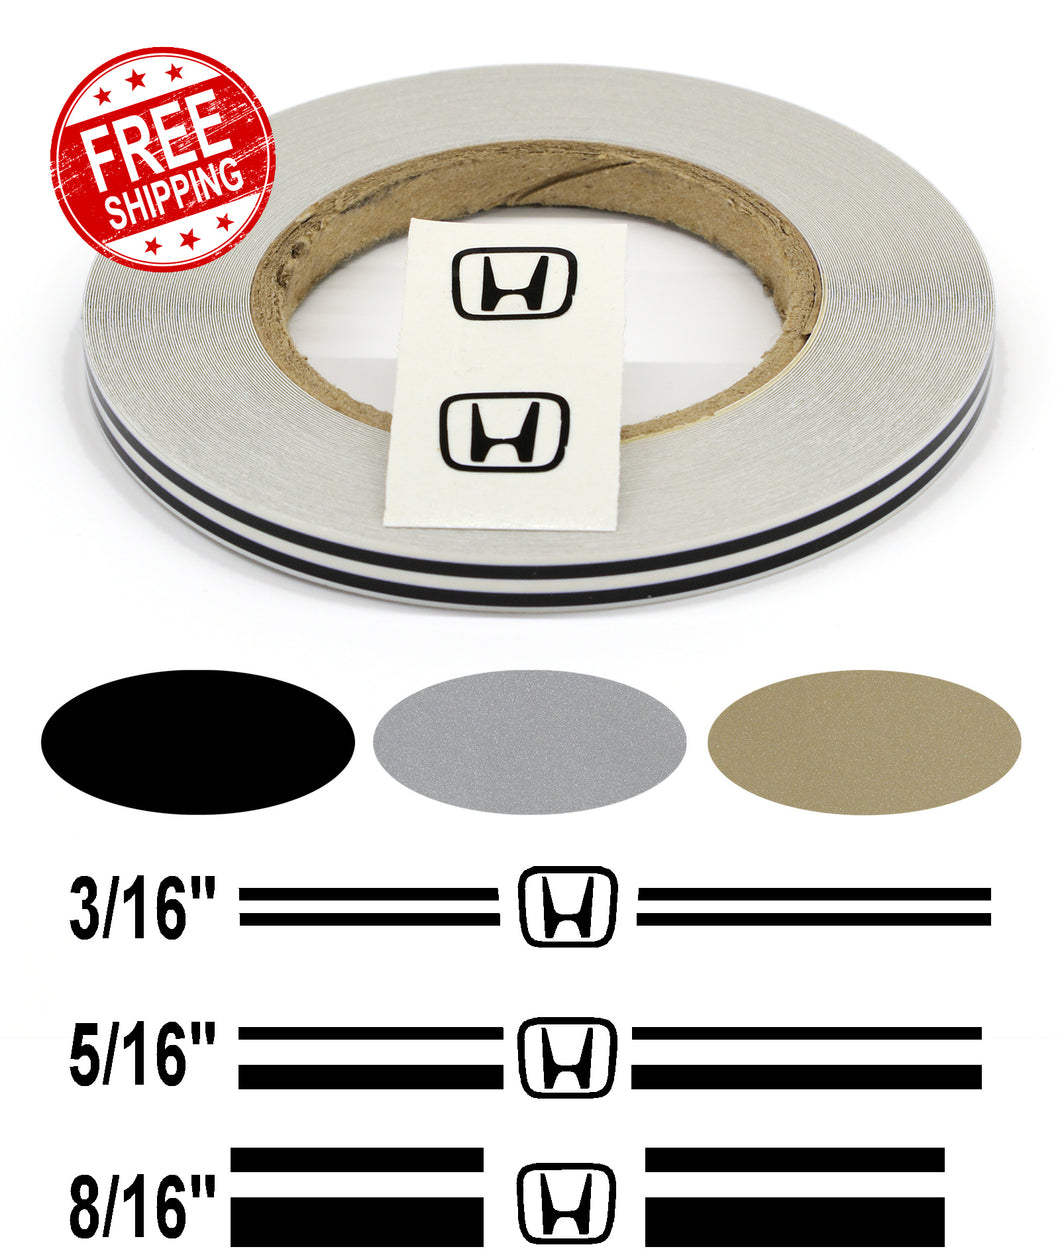 Stripe Kits for Honda avail in 3 colors and 3 stripe configurations